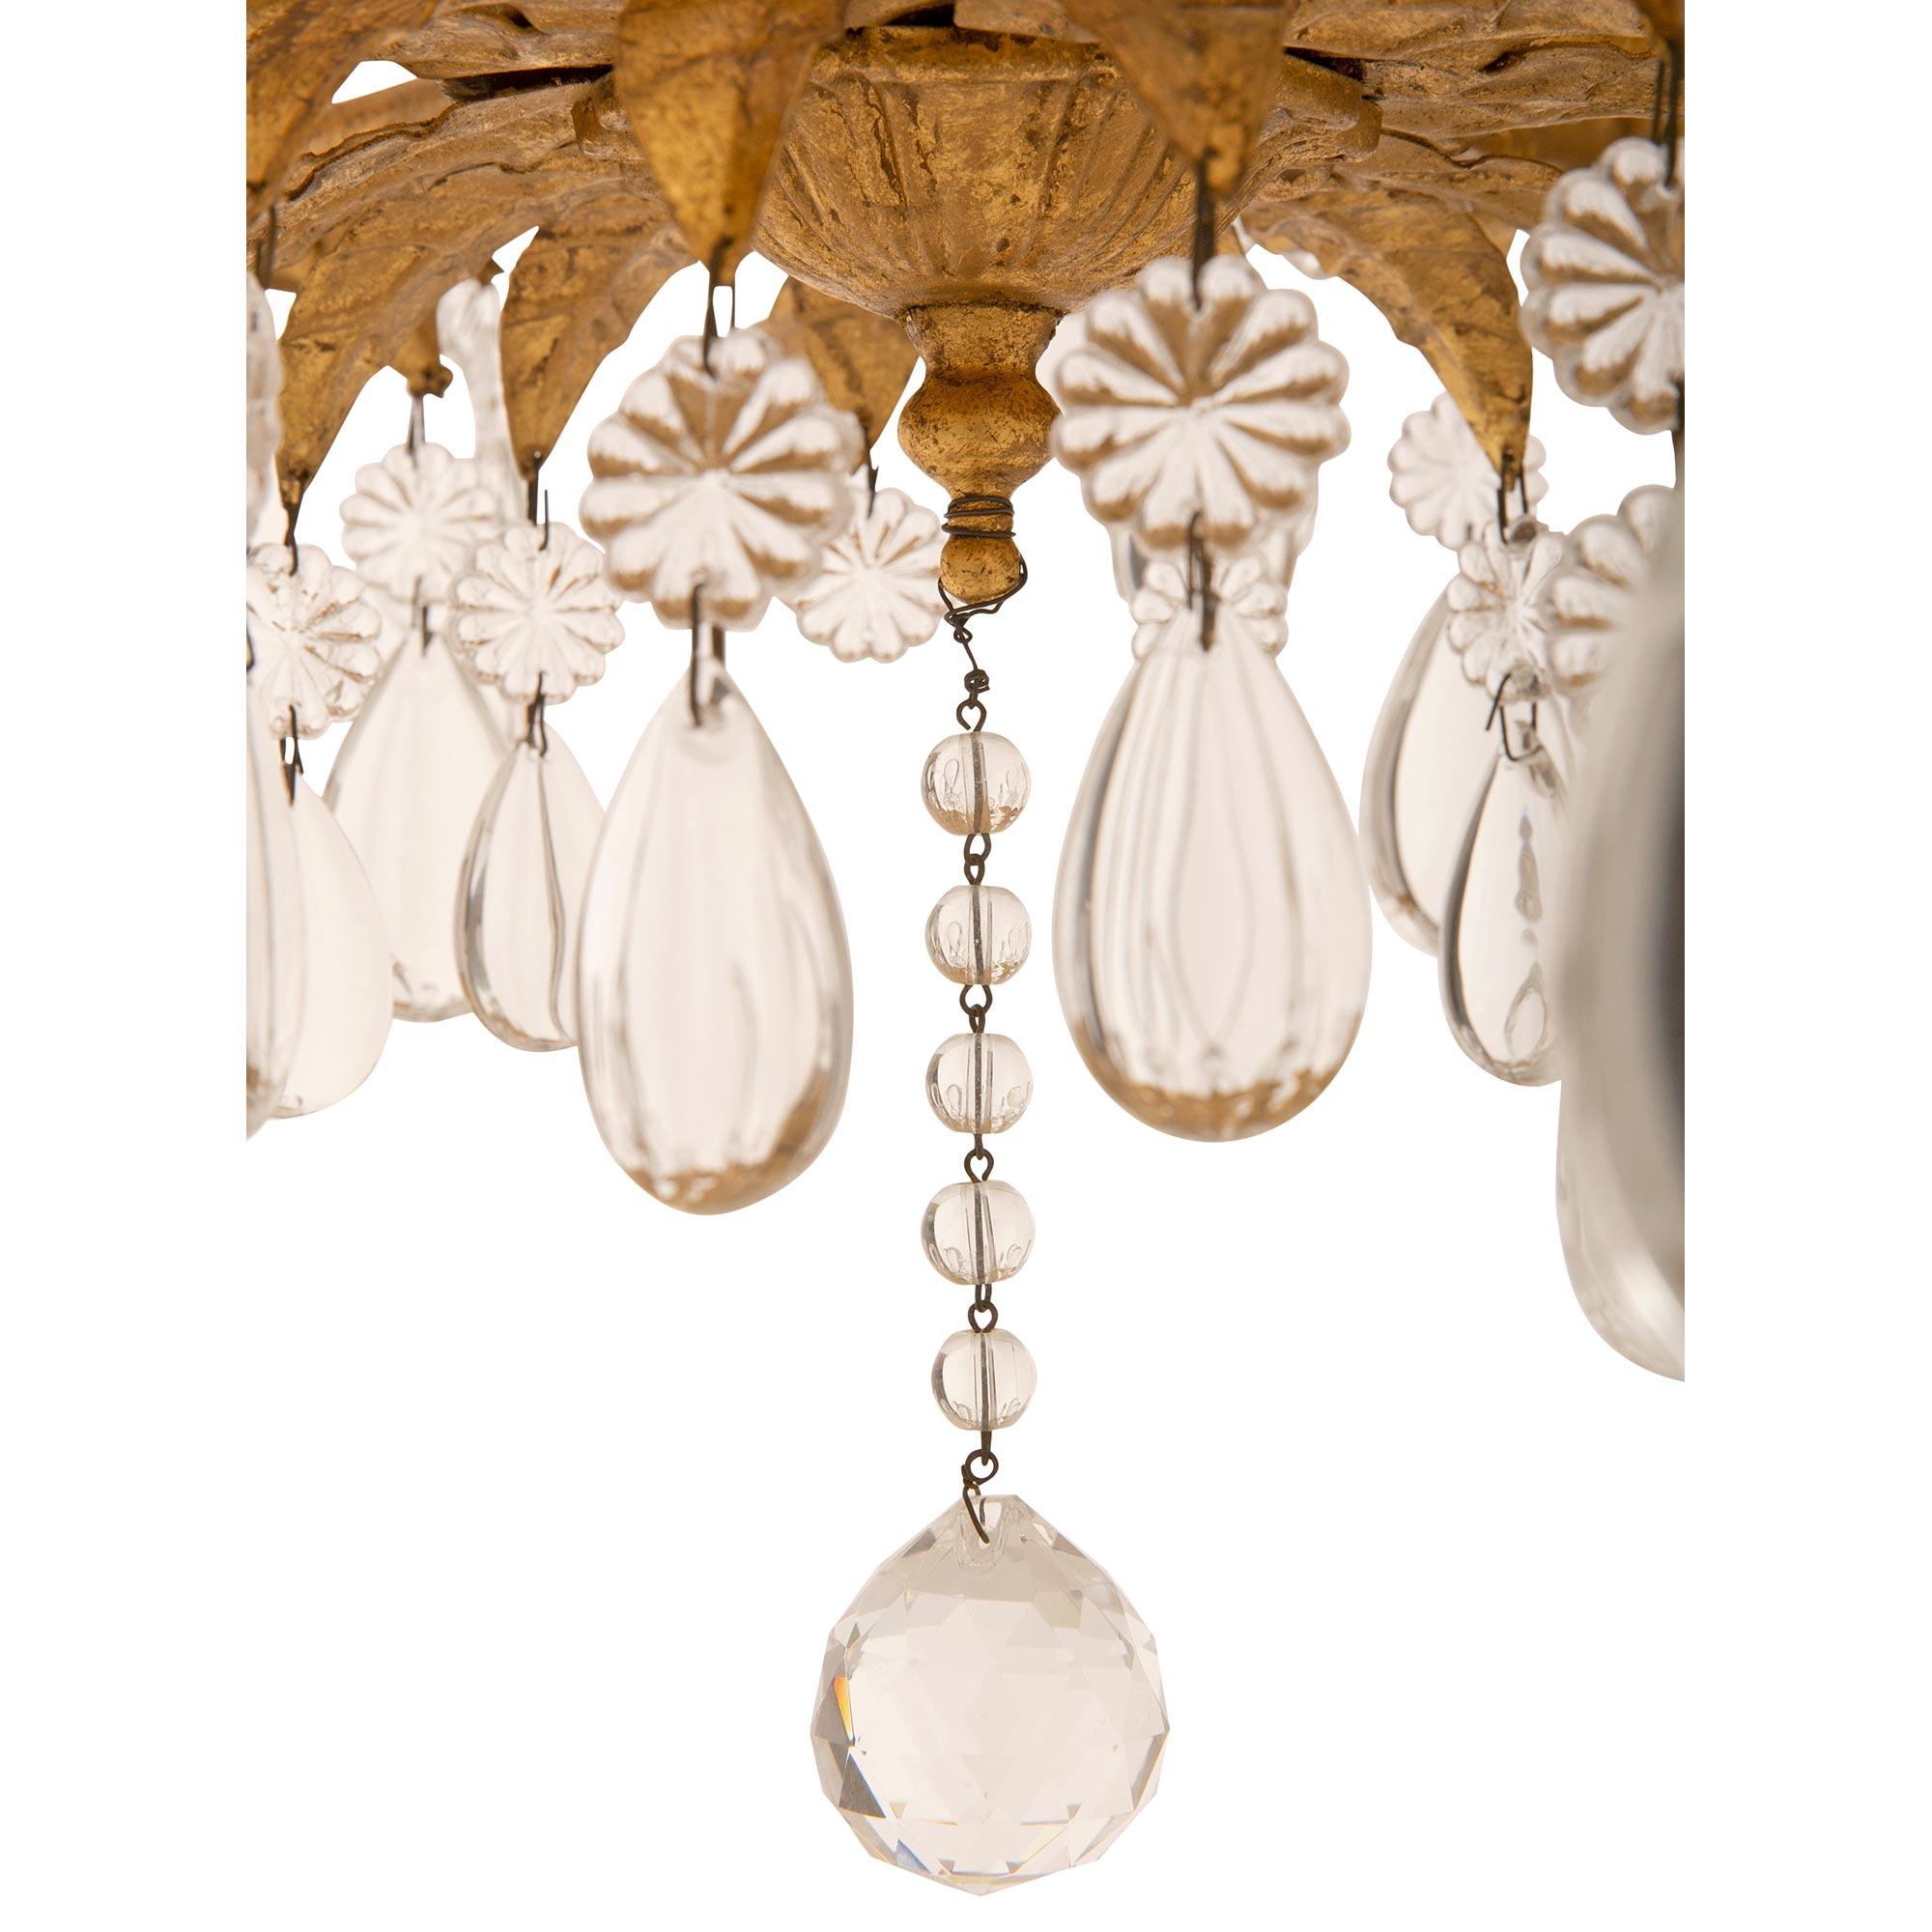  Pair of Italian turn of the cent Louis XV st. gilt metal and cryst chandeliers For Sale 2